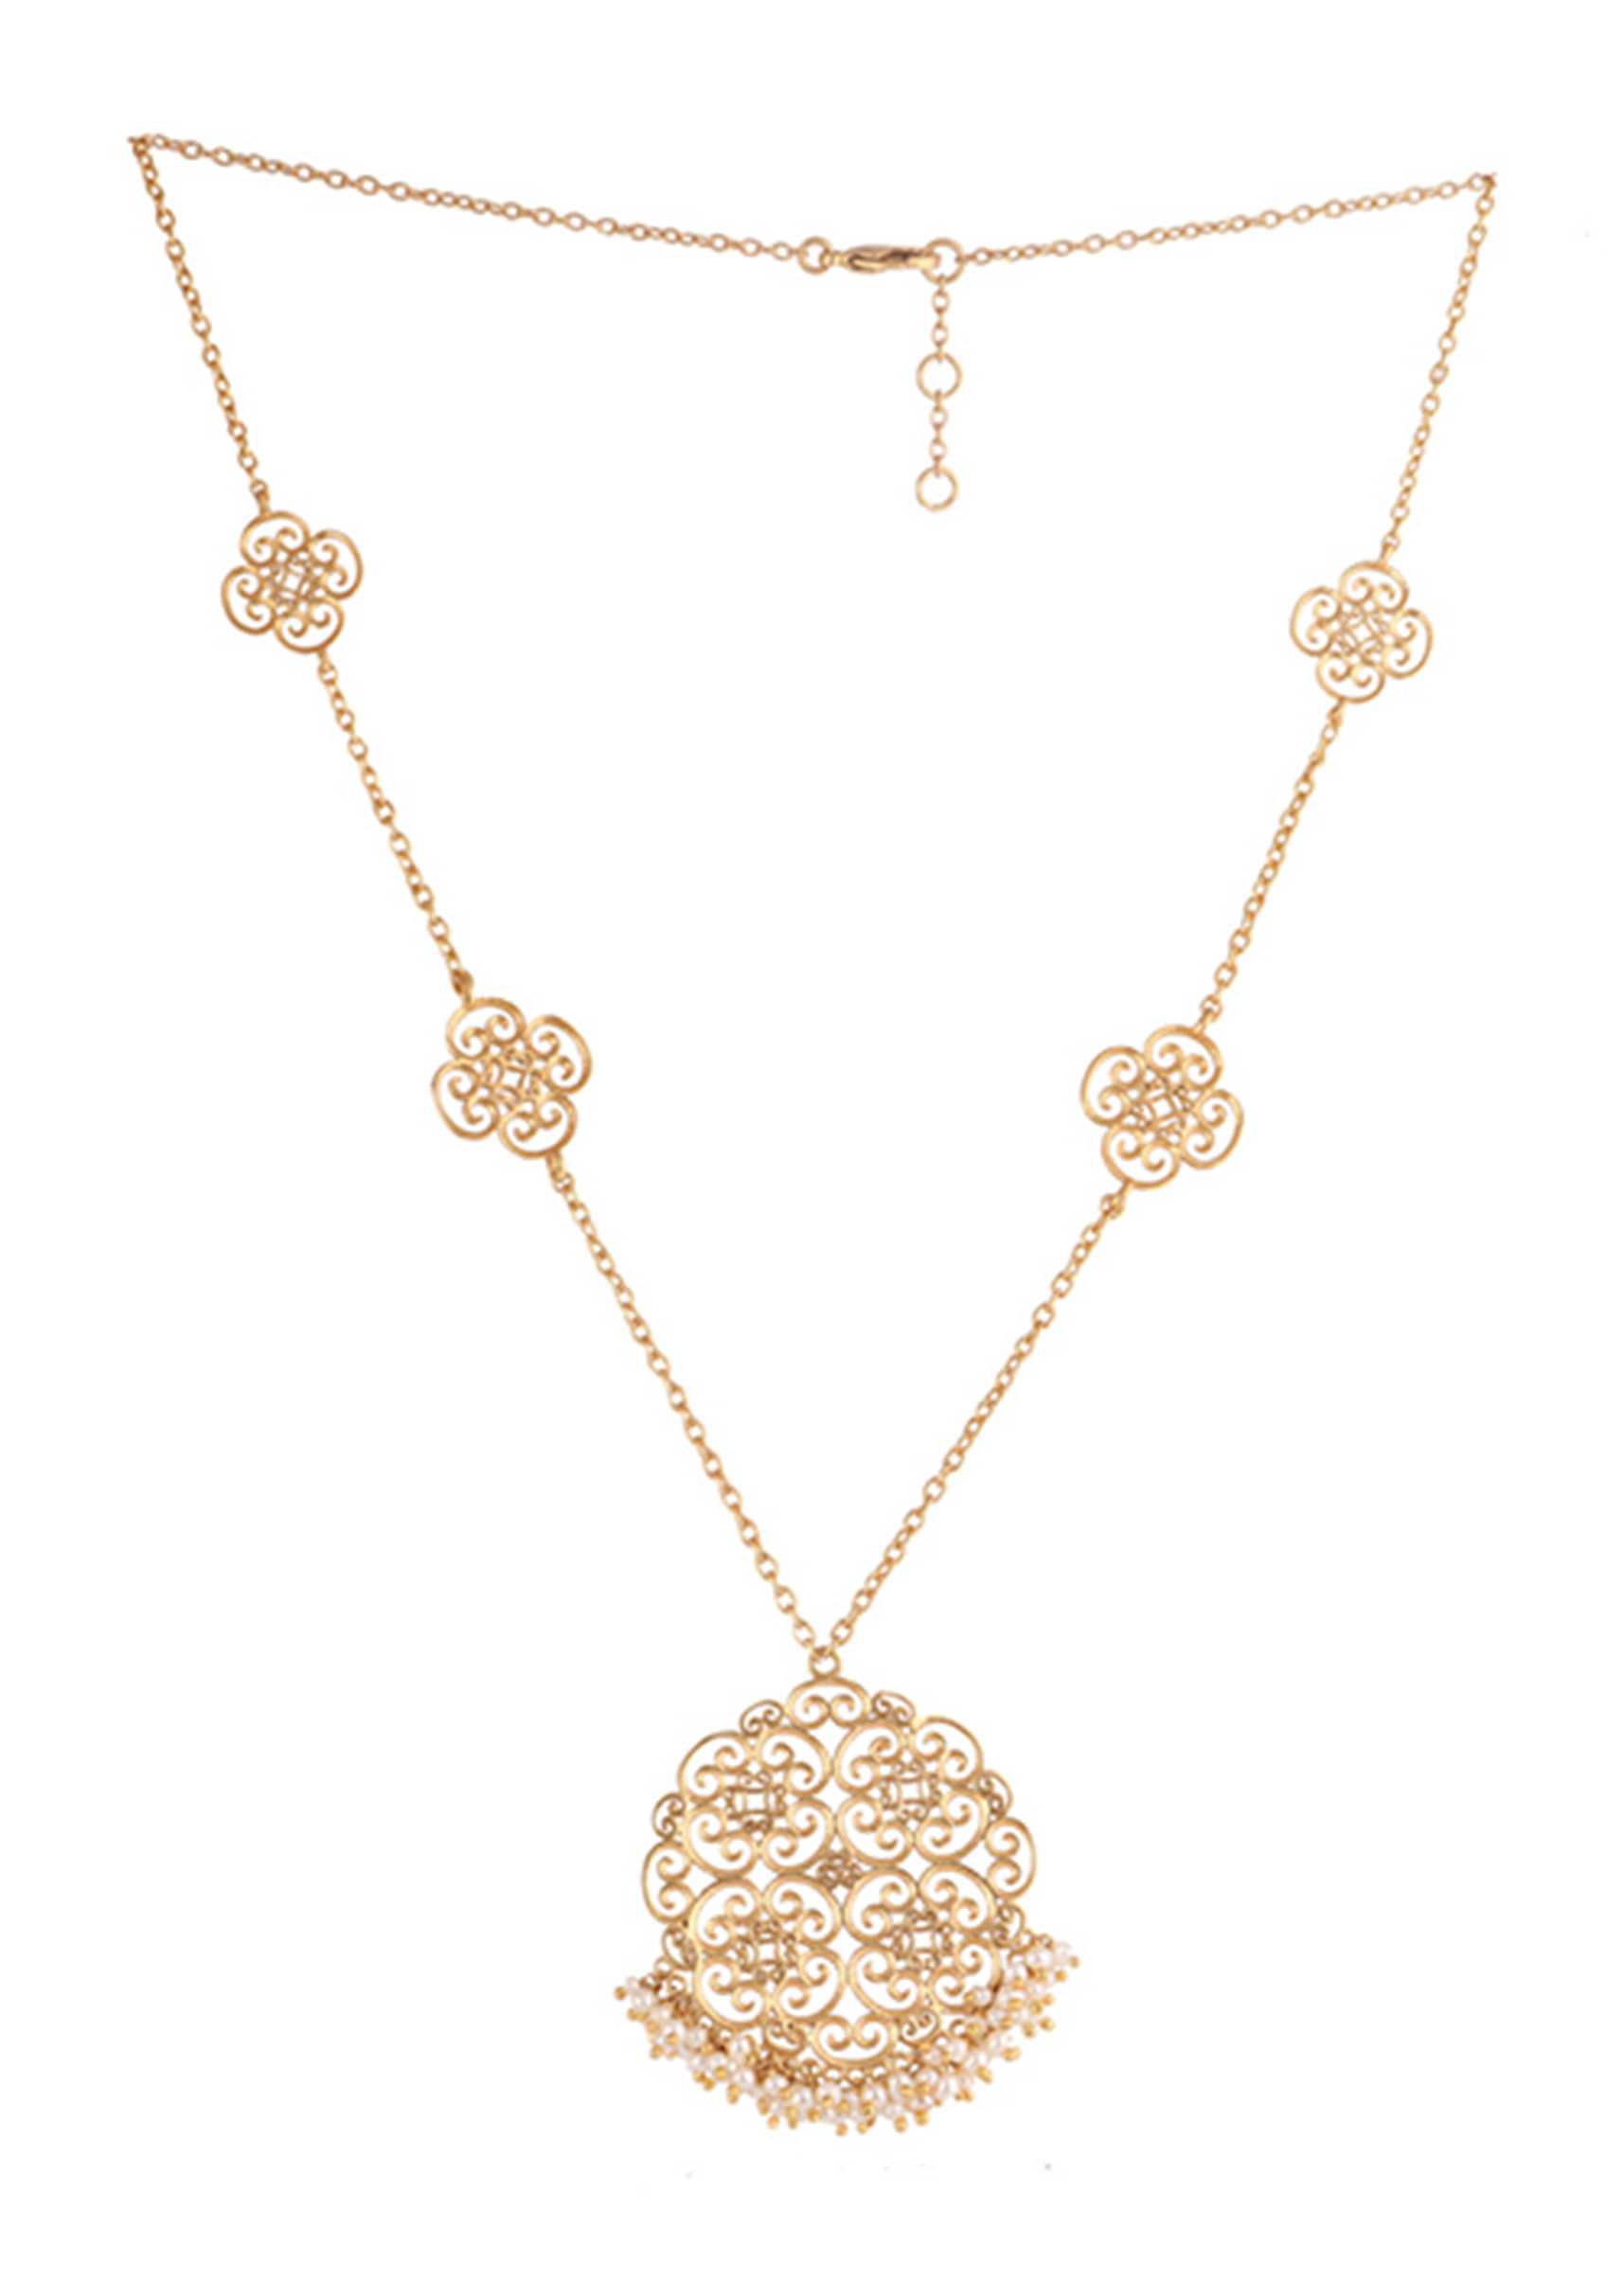 Gold Plated Necklace With Delicate Details Of Filigree Work And Playful Pearl Beads By Zariin